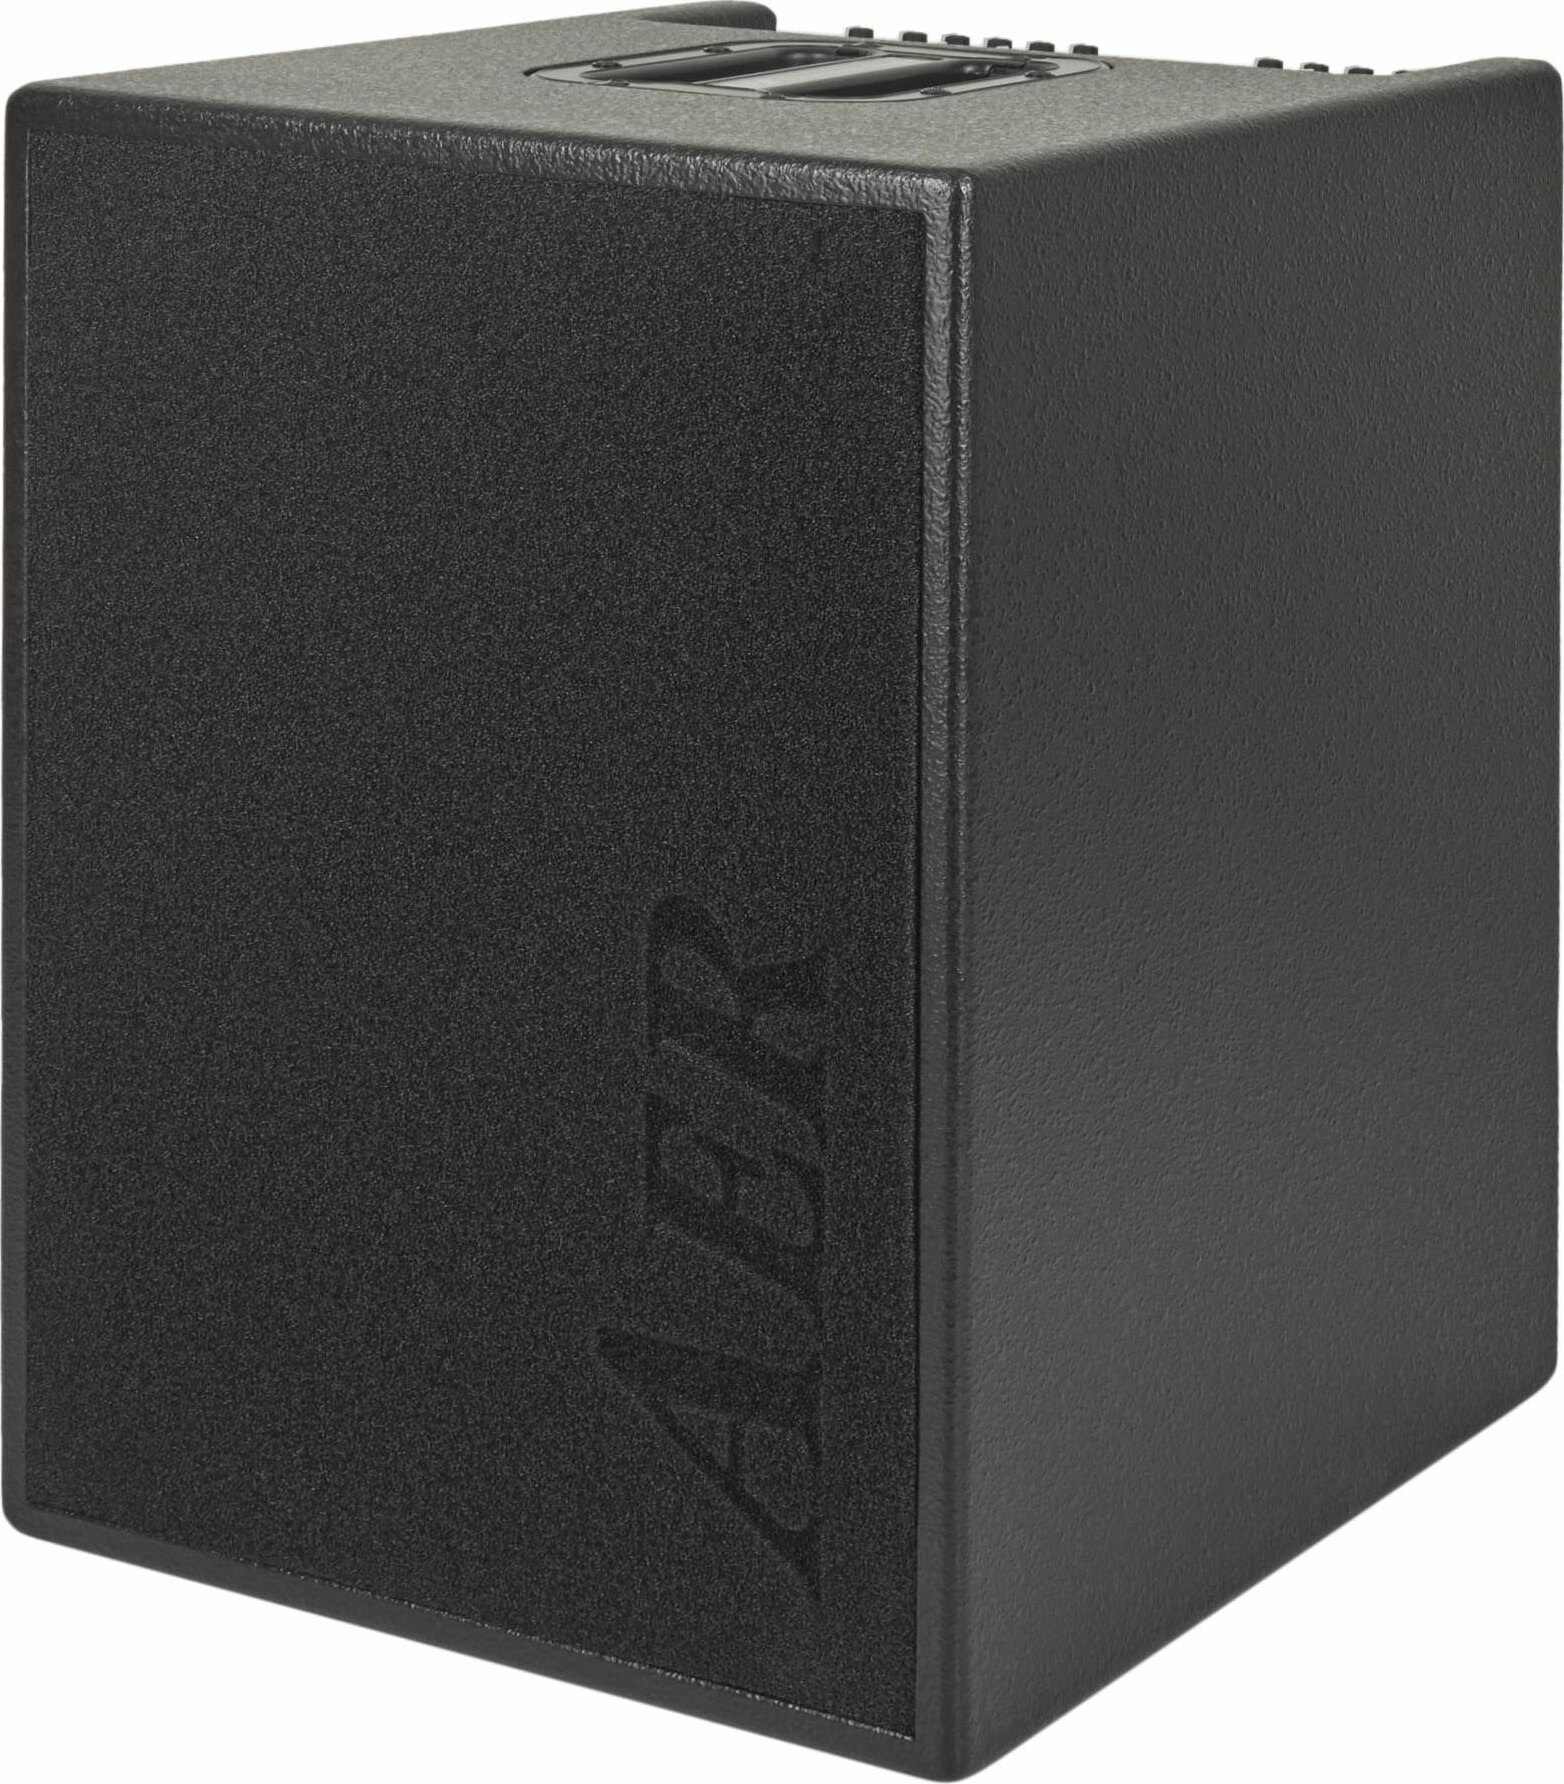 Aer Basic Performer 2 200w 4x8 Black +housse - Combo voor basses - Main picture